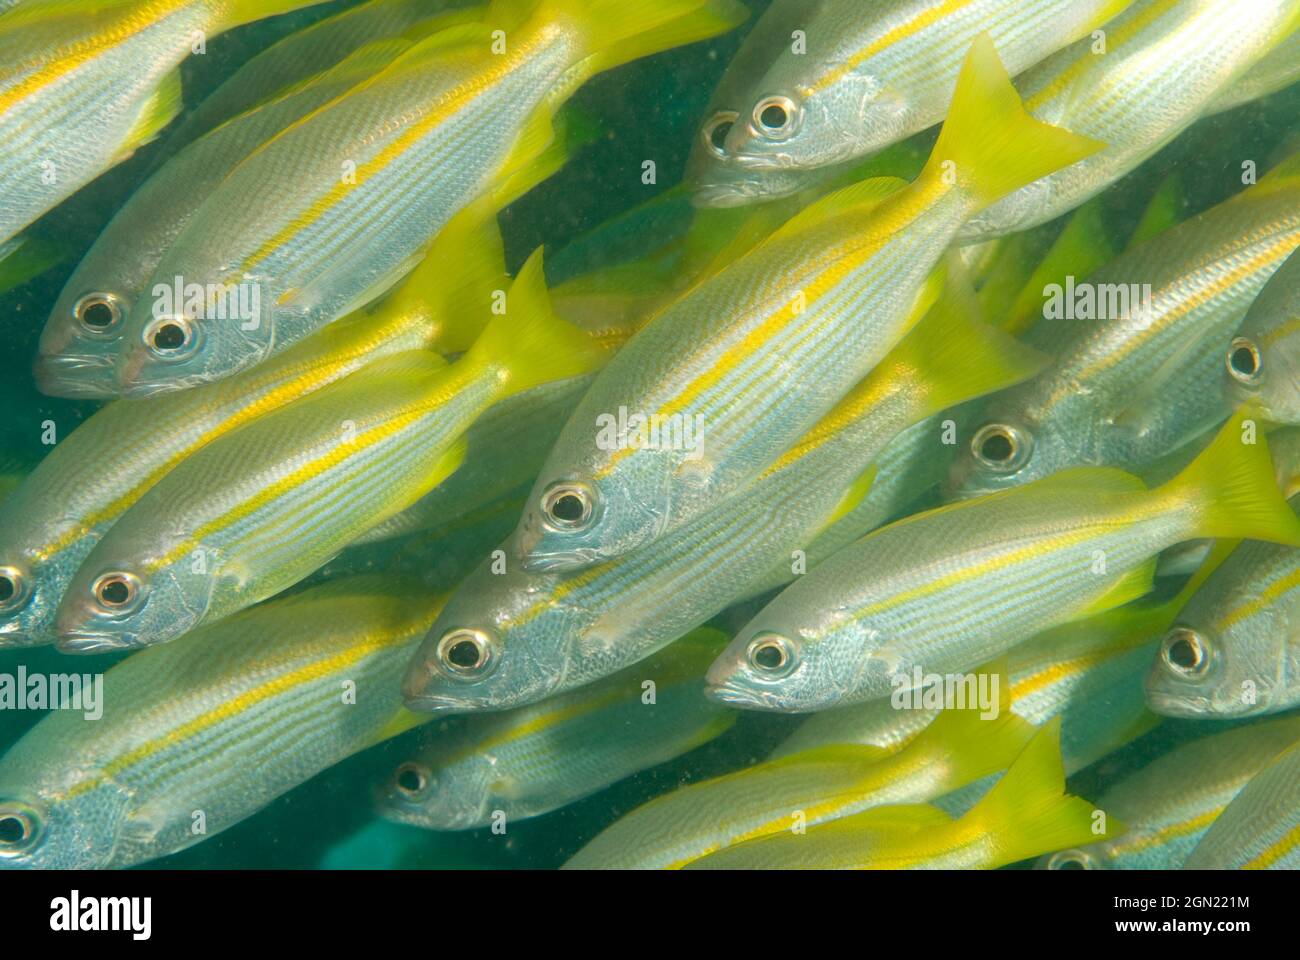 Bigeye snappers (Lutjanus lutjanus), usually seen in large schools, to depths of at least 90 m. May reach 30 cm long. Anilao, Manila, Philippines Stock Photo